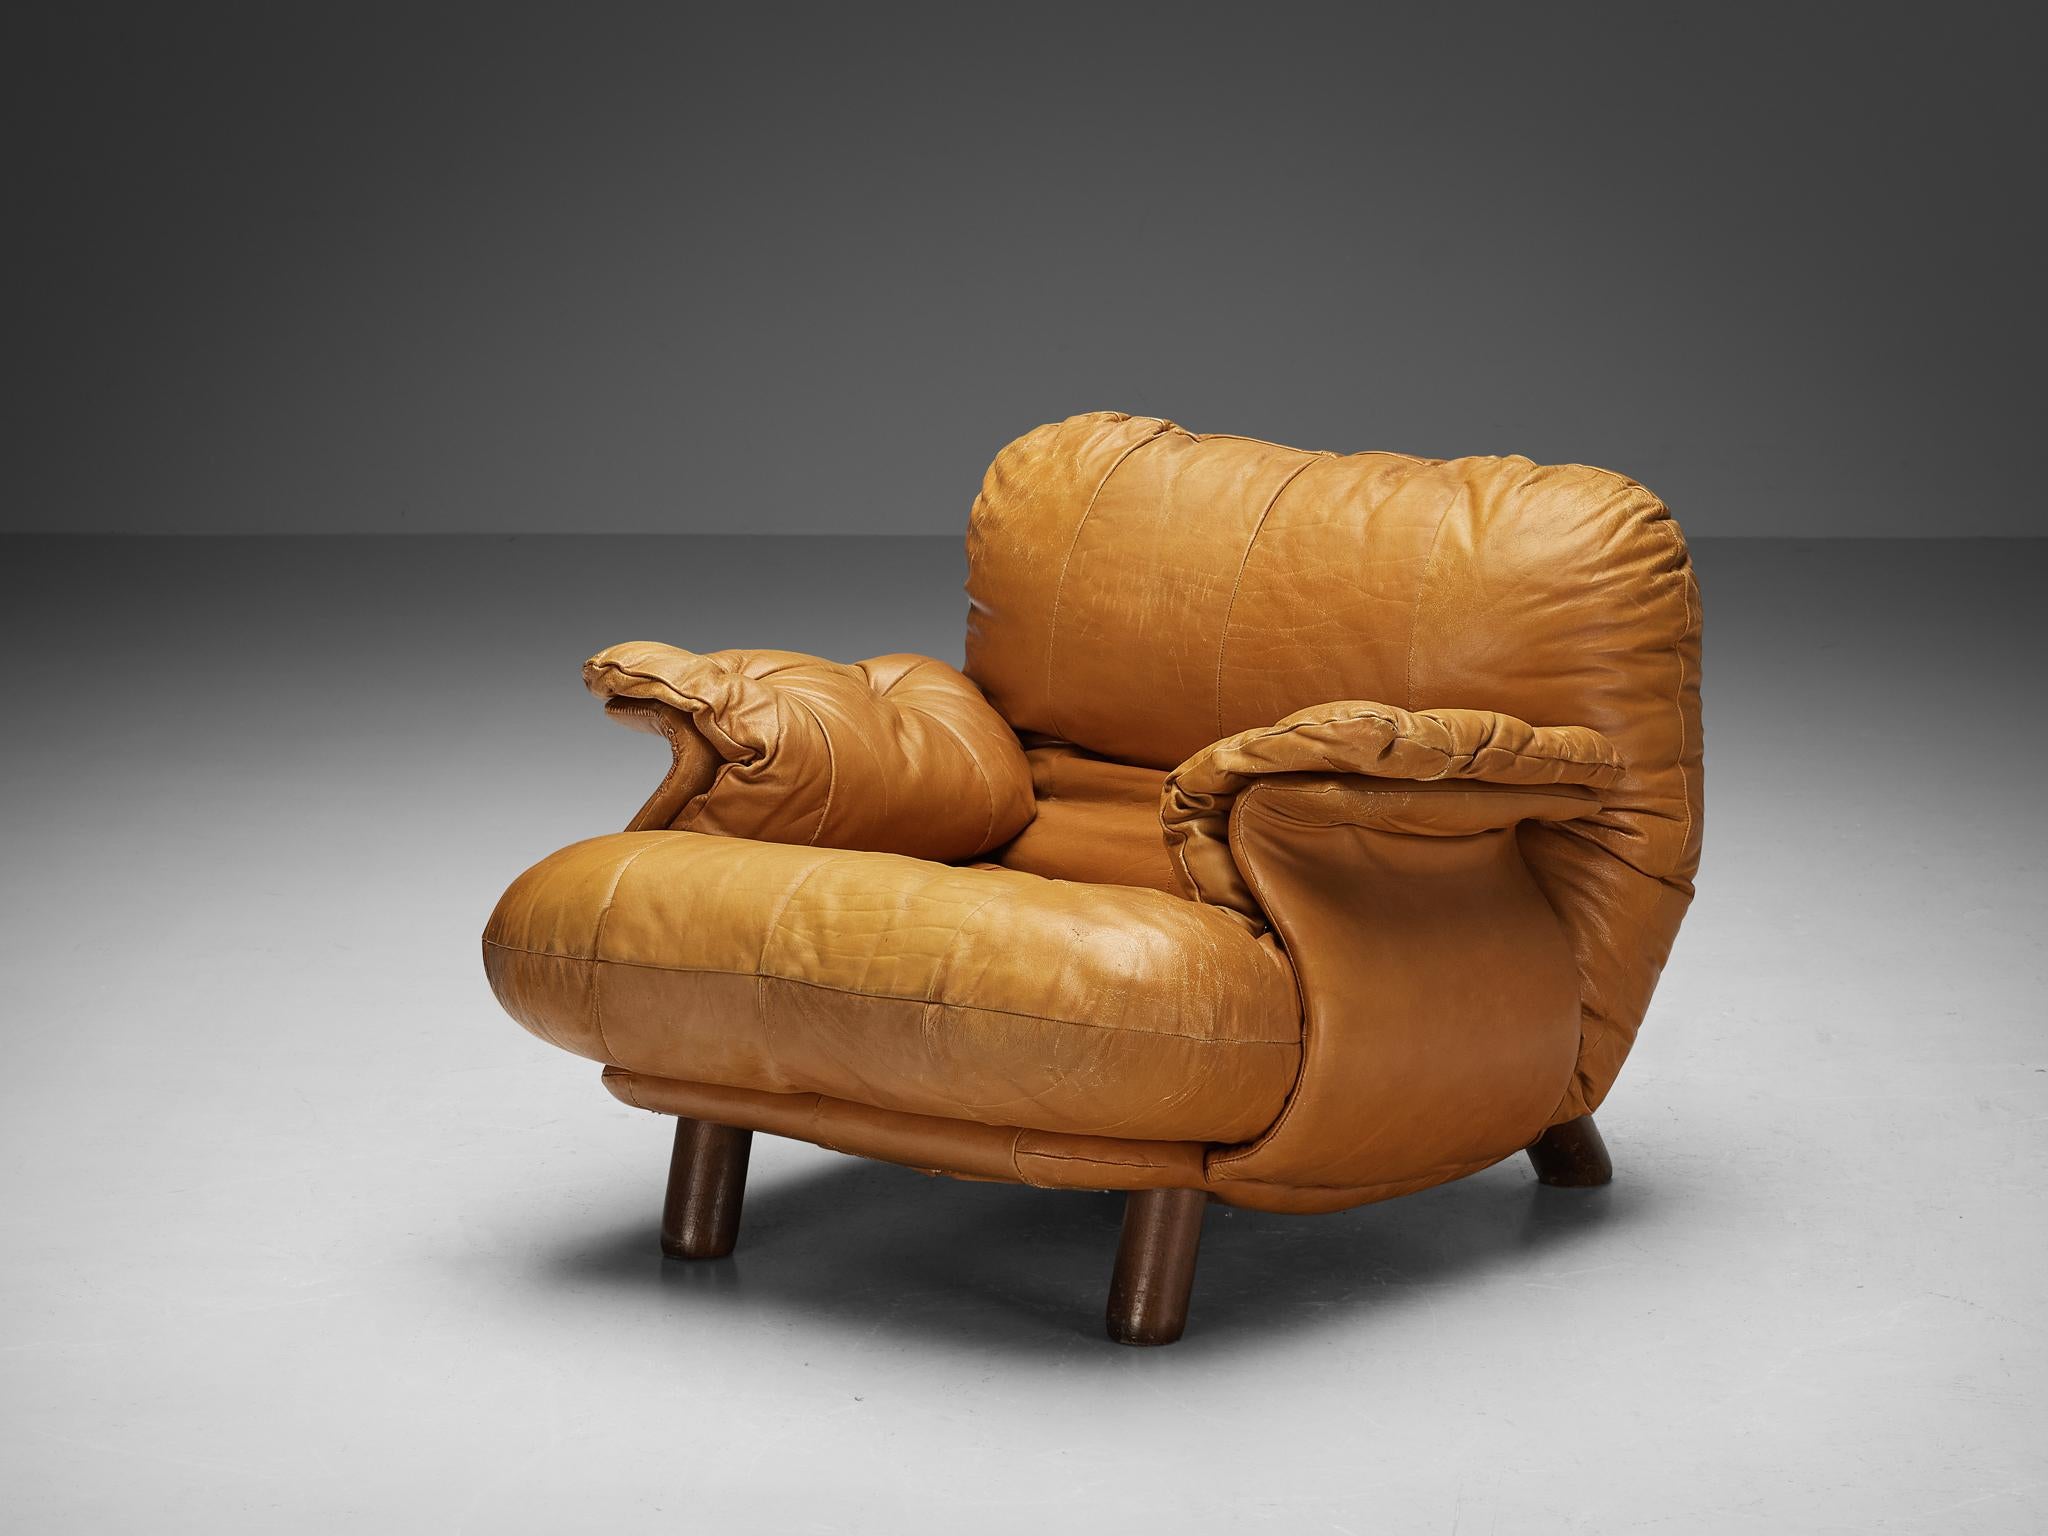 E. Cobianchi for Insa Italy, lounge chair, leather, wood, Italy, 1970s

A bulky and cloud-like lounge chair by E. Cobianchi for Italian manufacturer Insa, designed in the 1970s. This chair features thick, tufted seats and backrests. The armrests are